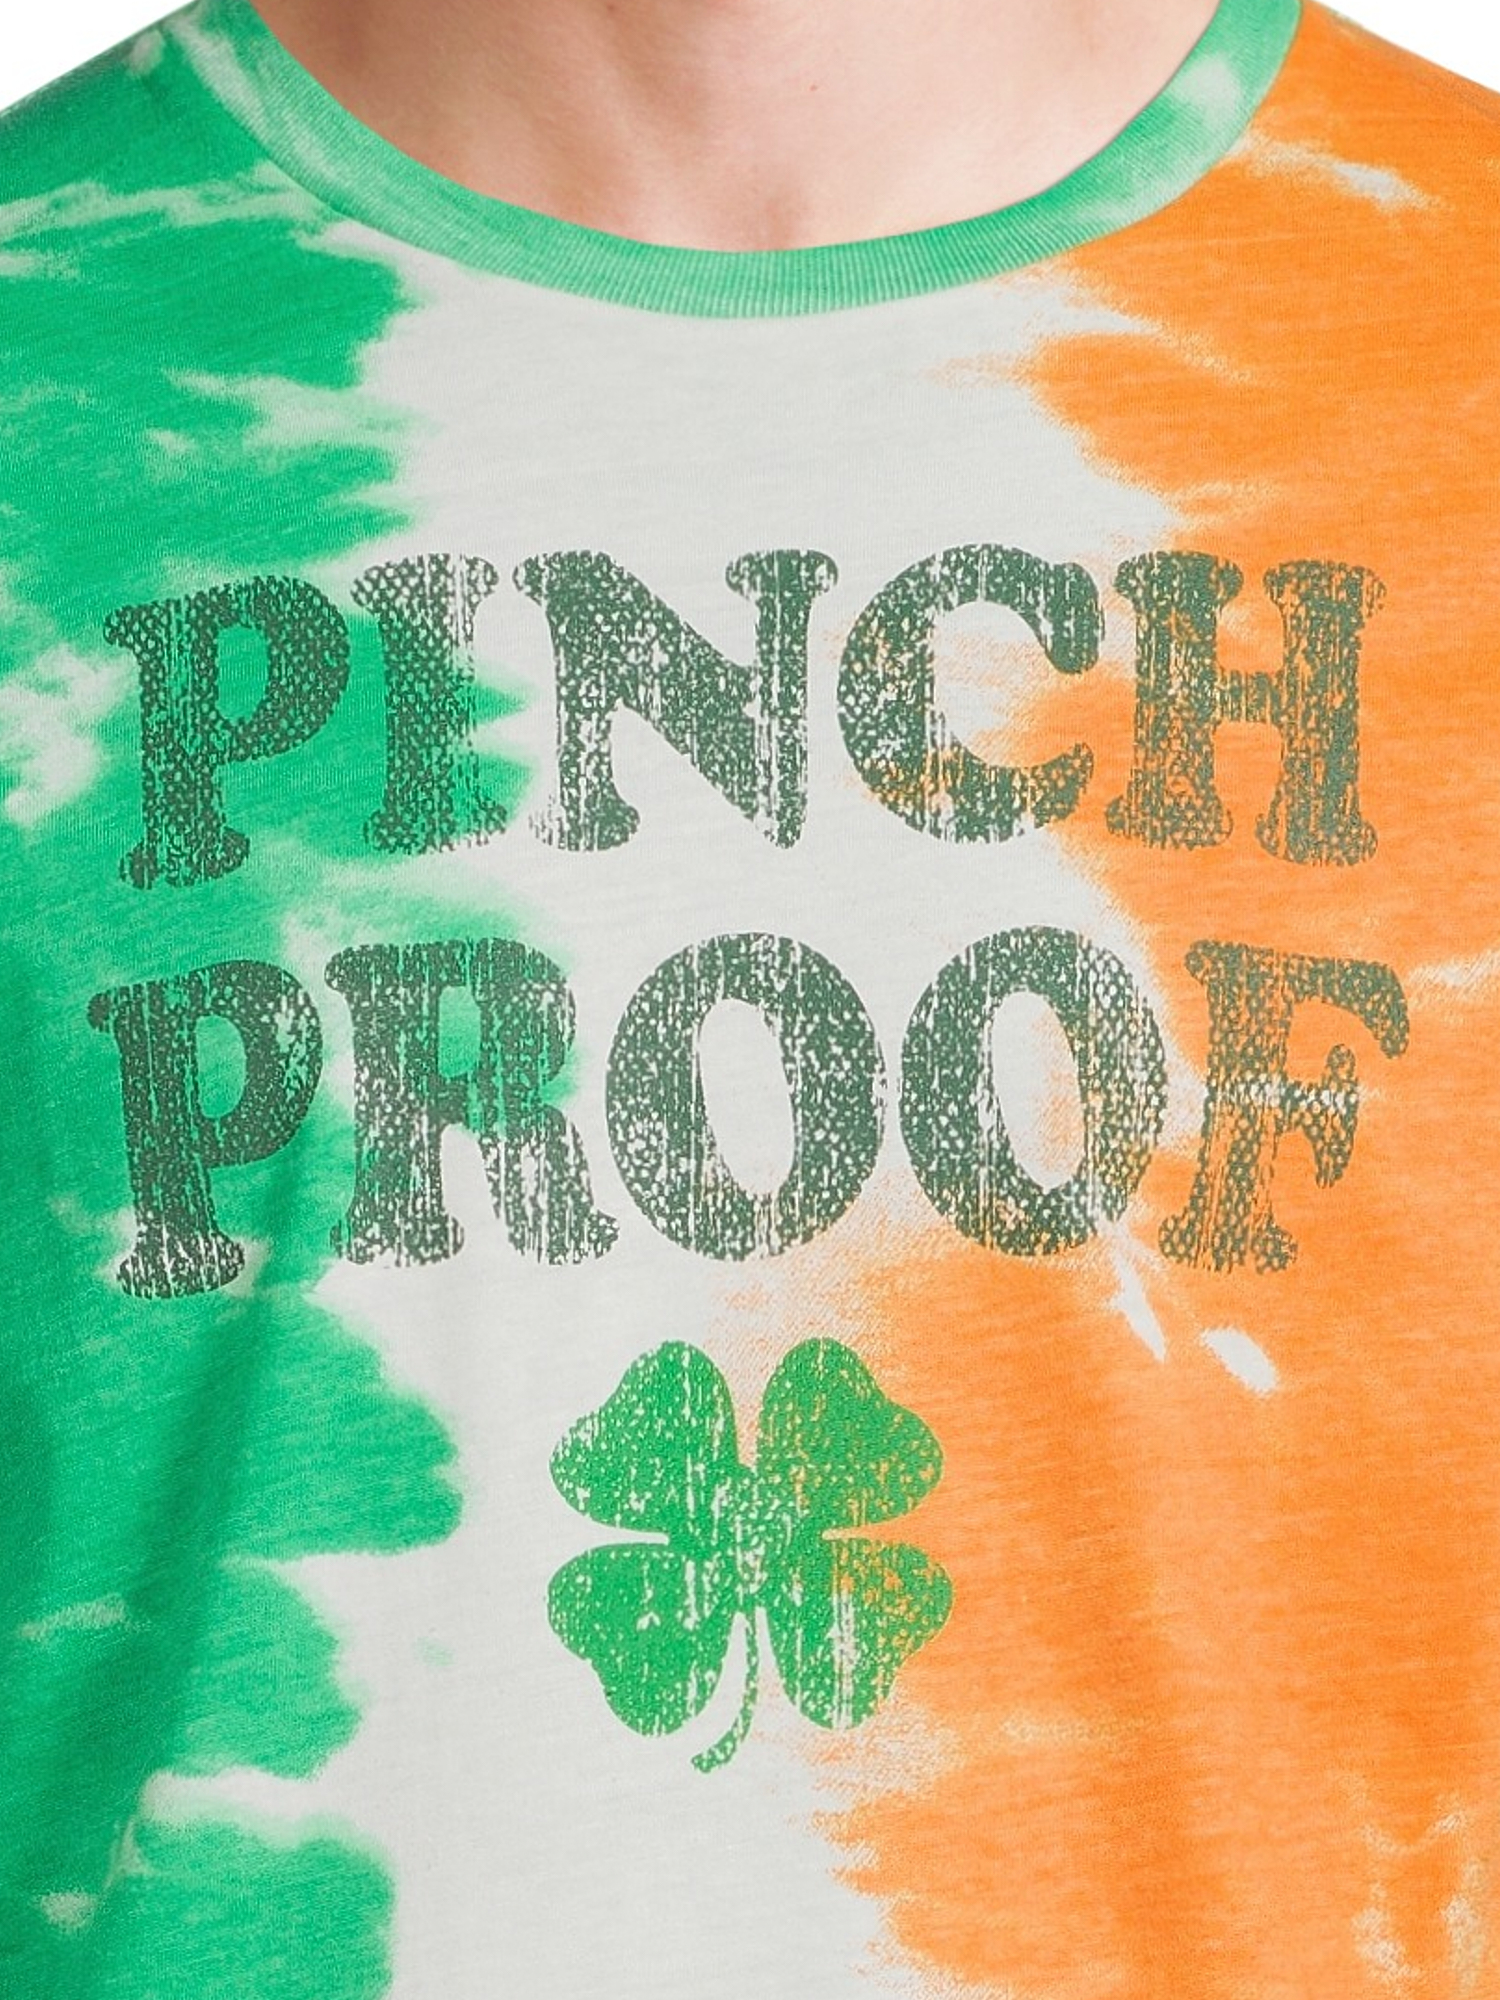 St. Patrick's Day Men's & Big Men's Life of the Paddy and Pinch Proof Graphic Tee Bundle, 2-Pack - image 5 of 6